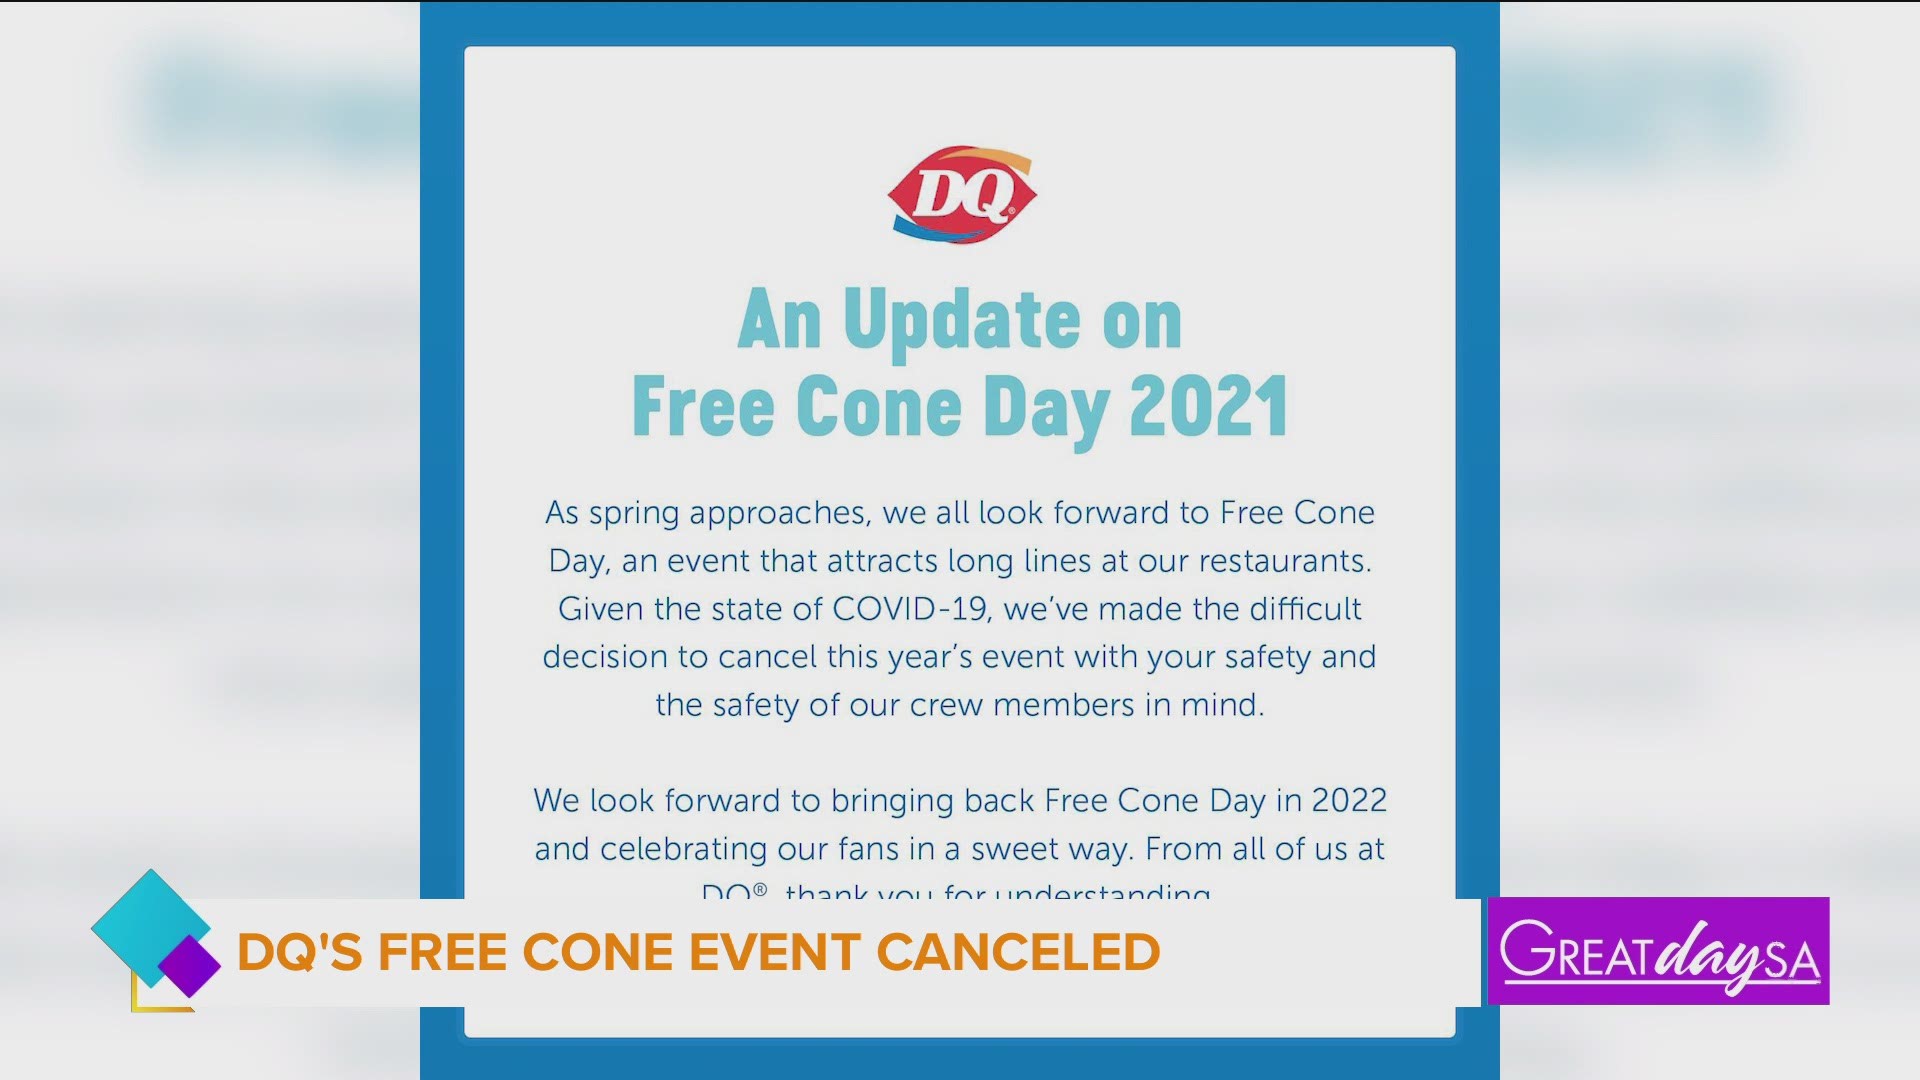 Say it ain't so! Dairy Queen is canceling their free cone day this year due to the pandemic.